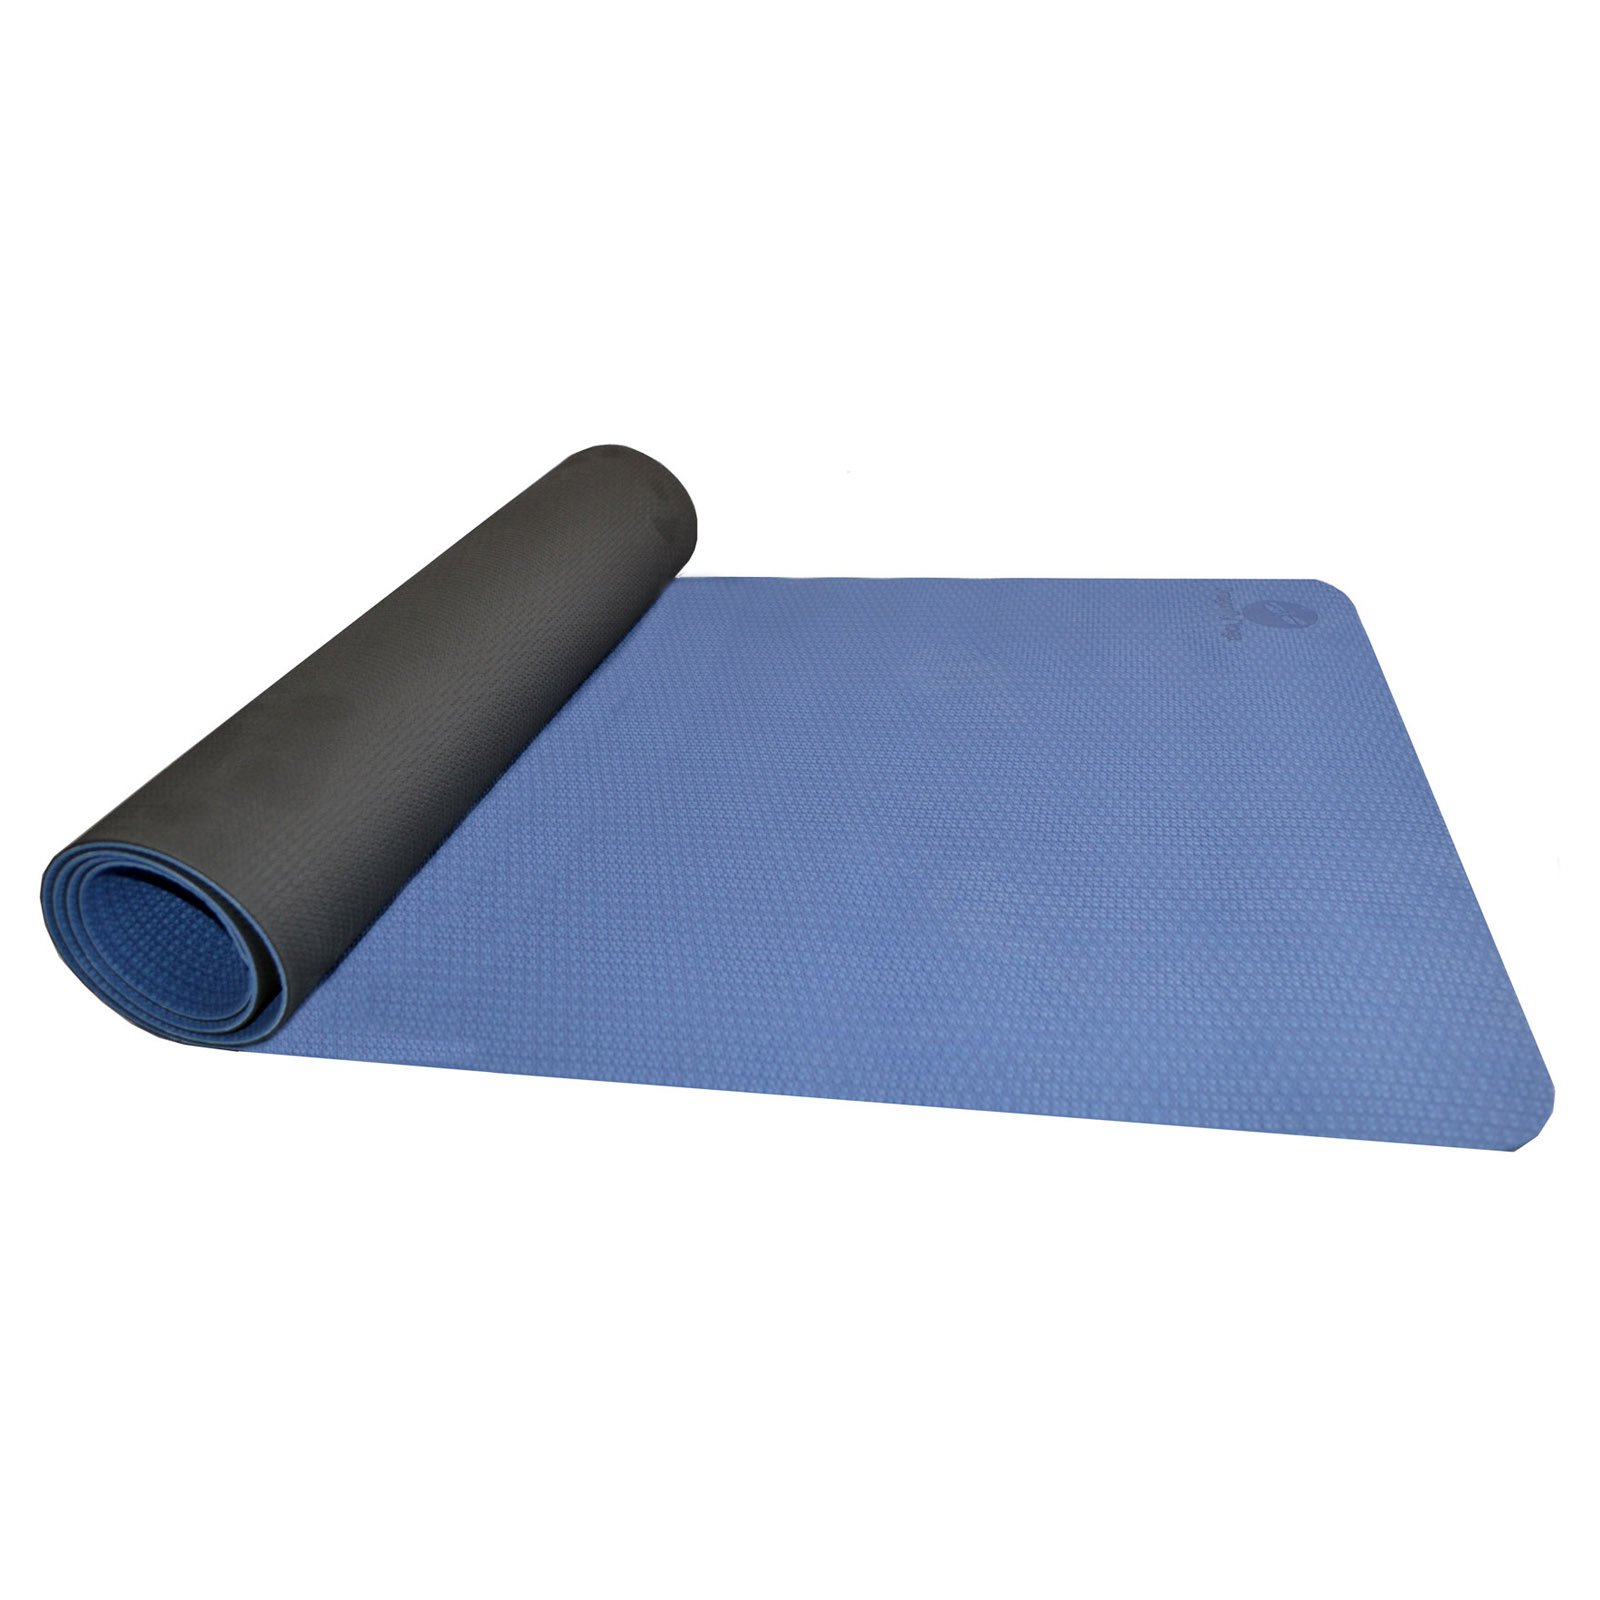 Dragonfly TPE Lite Mat - image 2 of 2